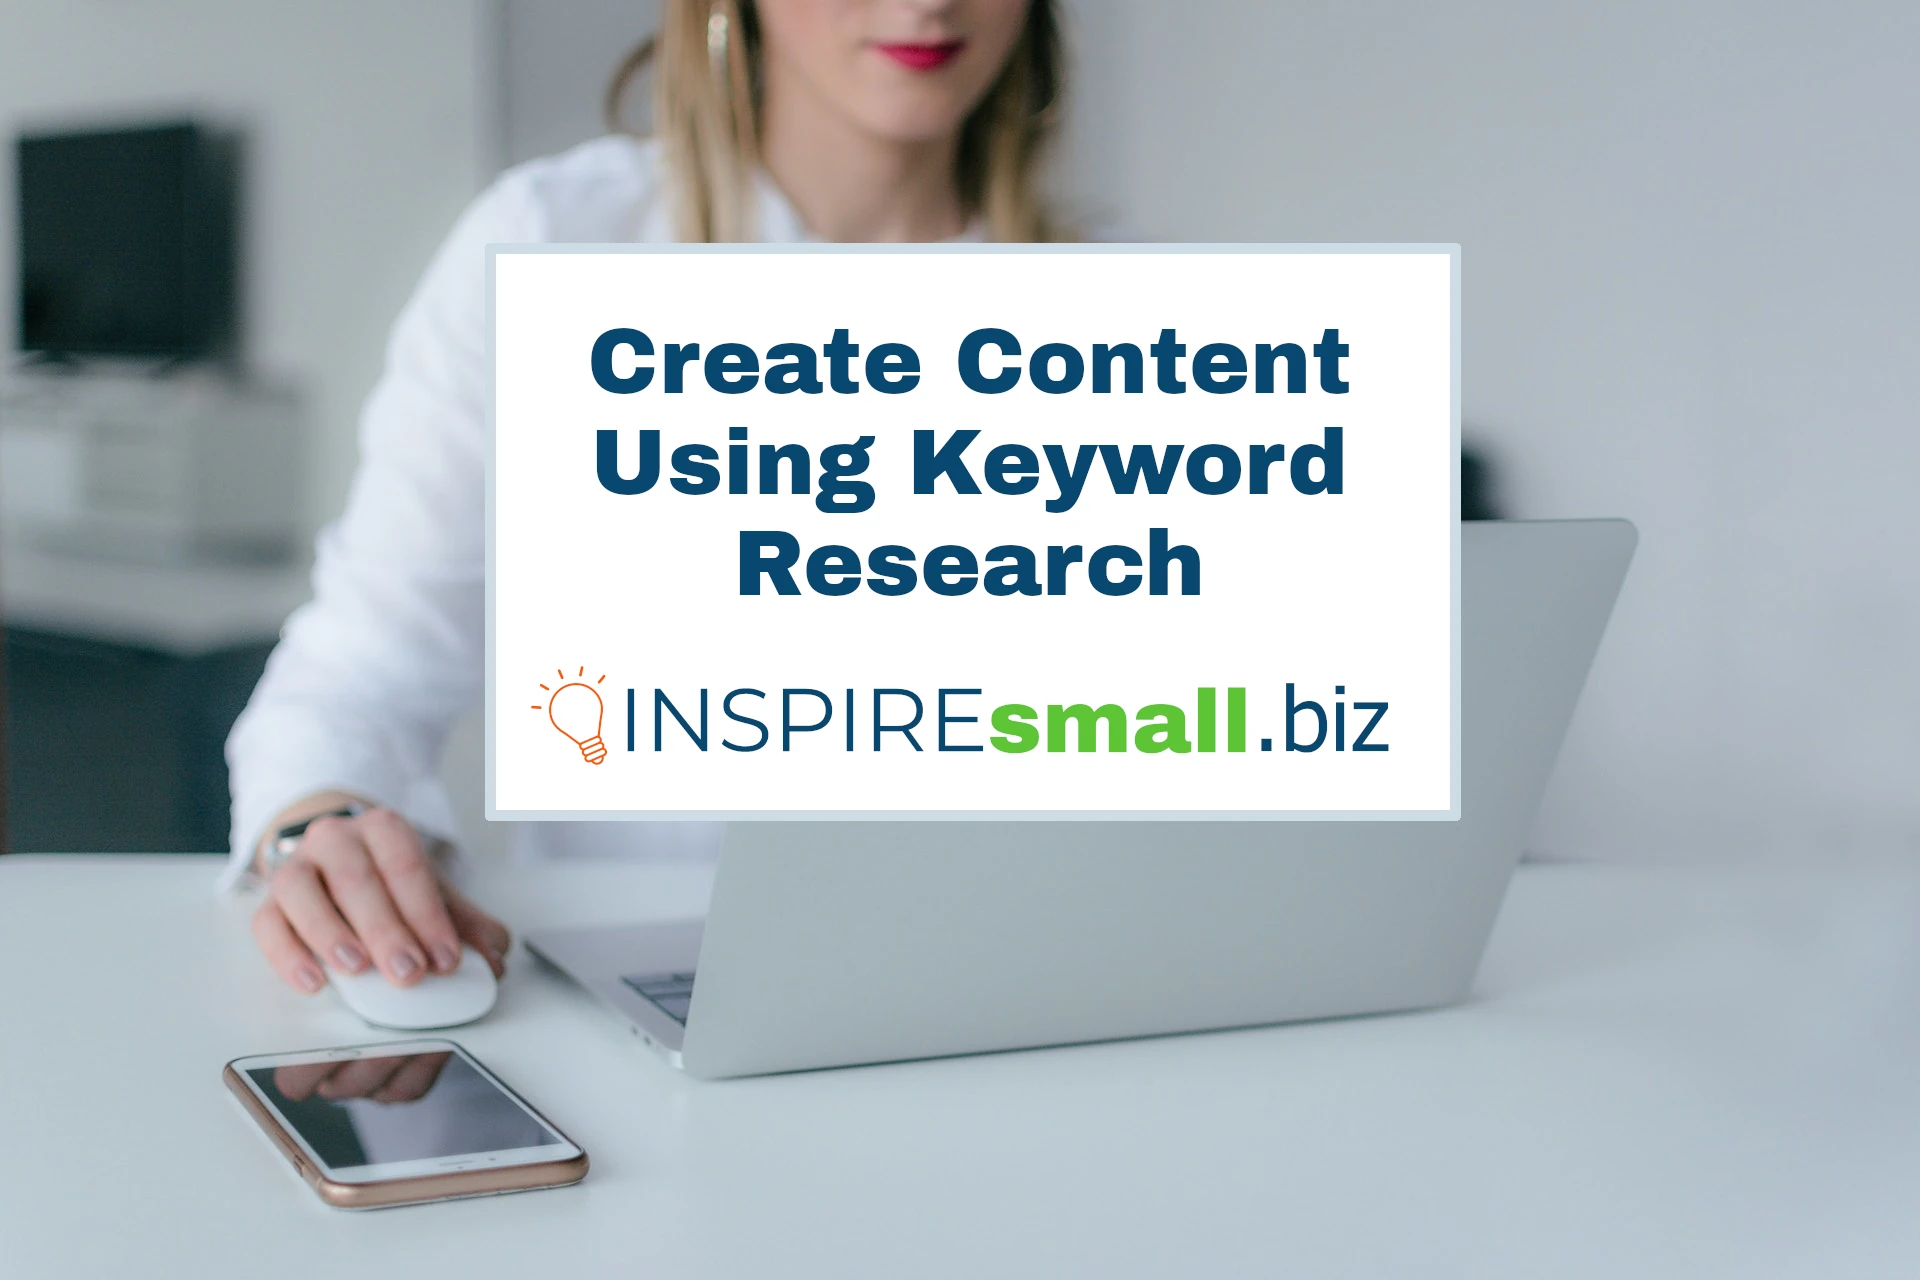 How can I use keyword research to create good content for my website?